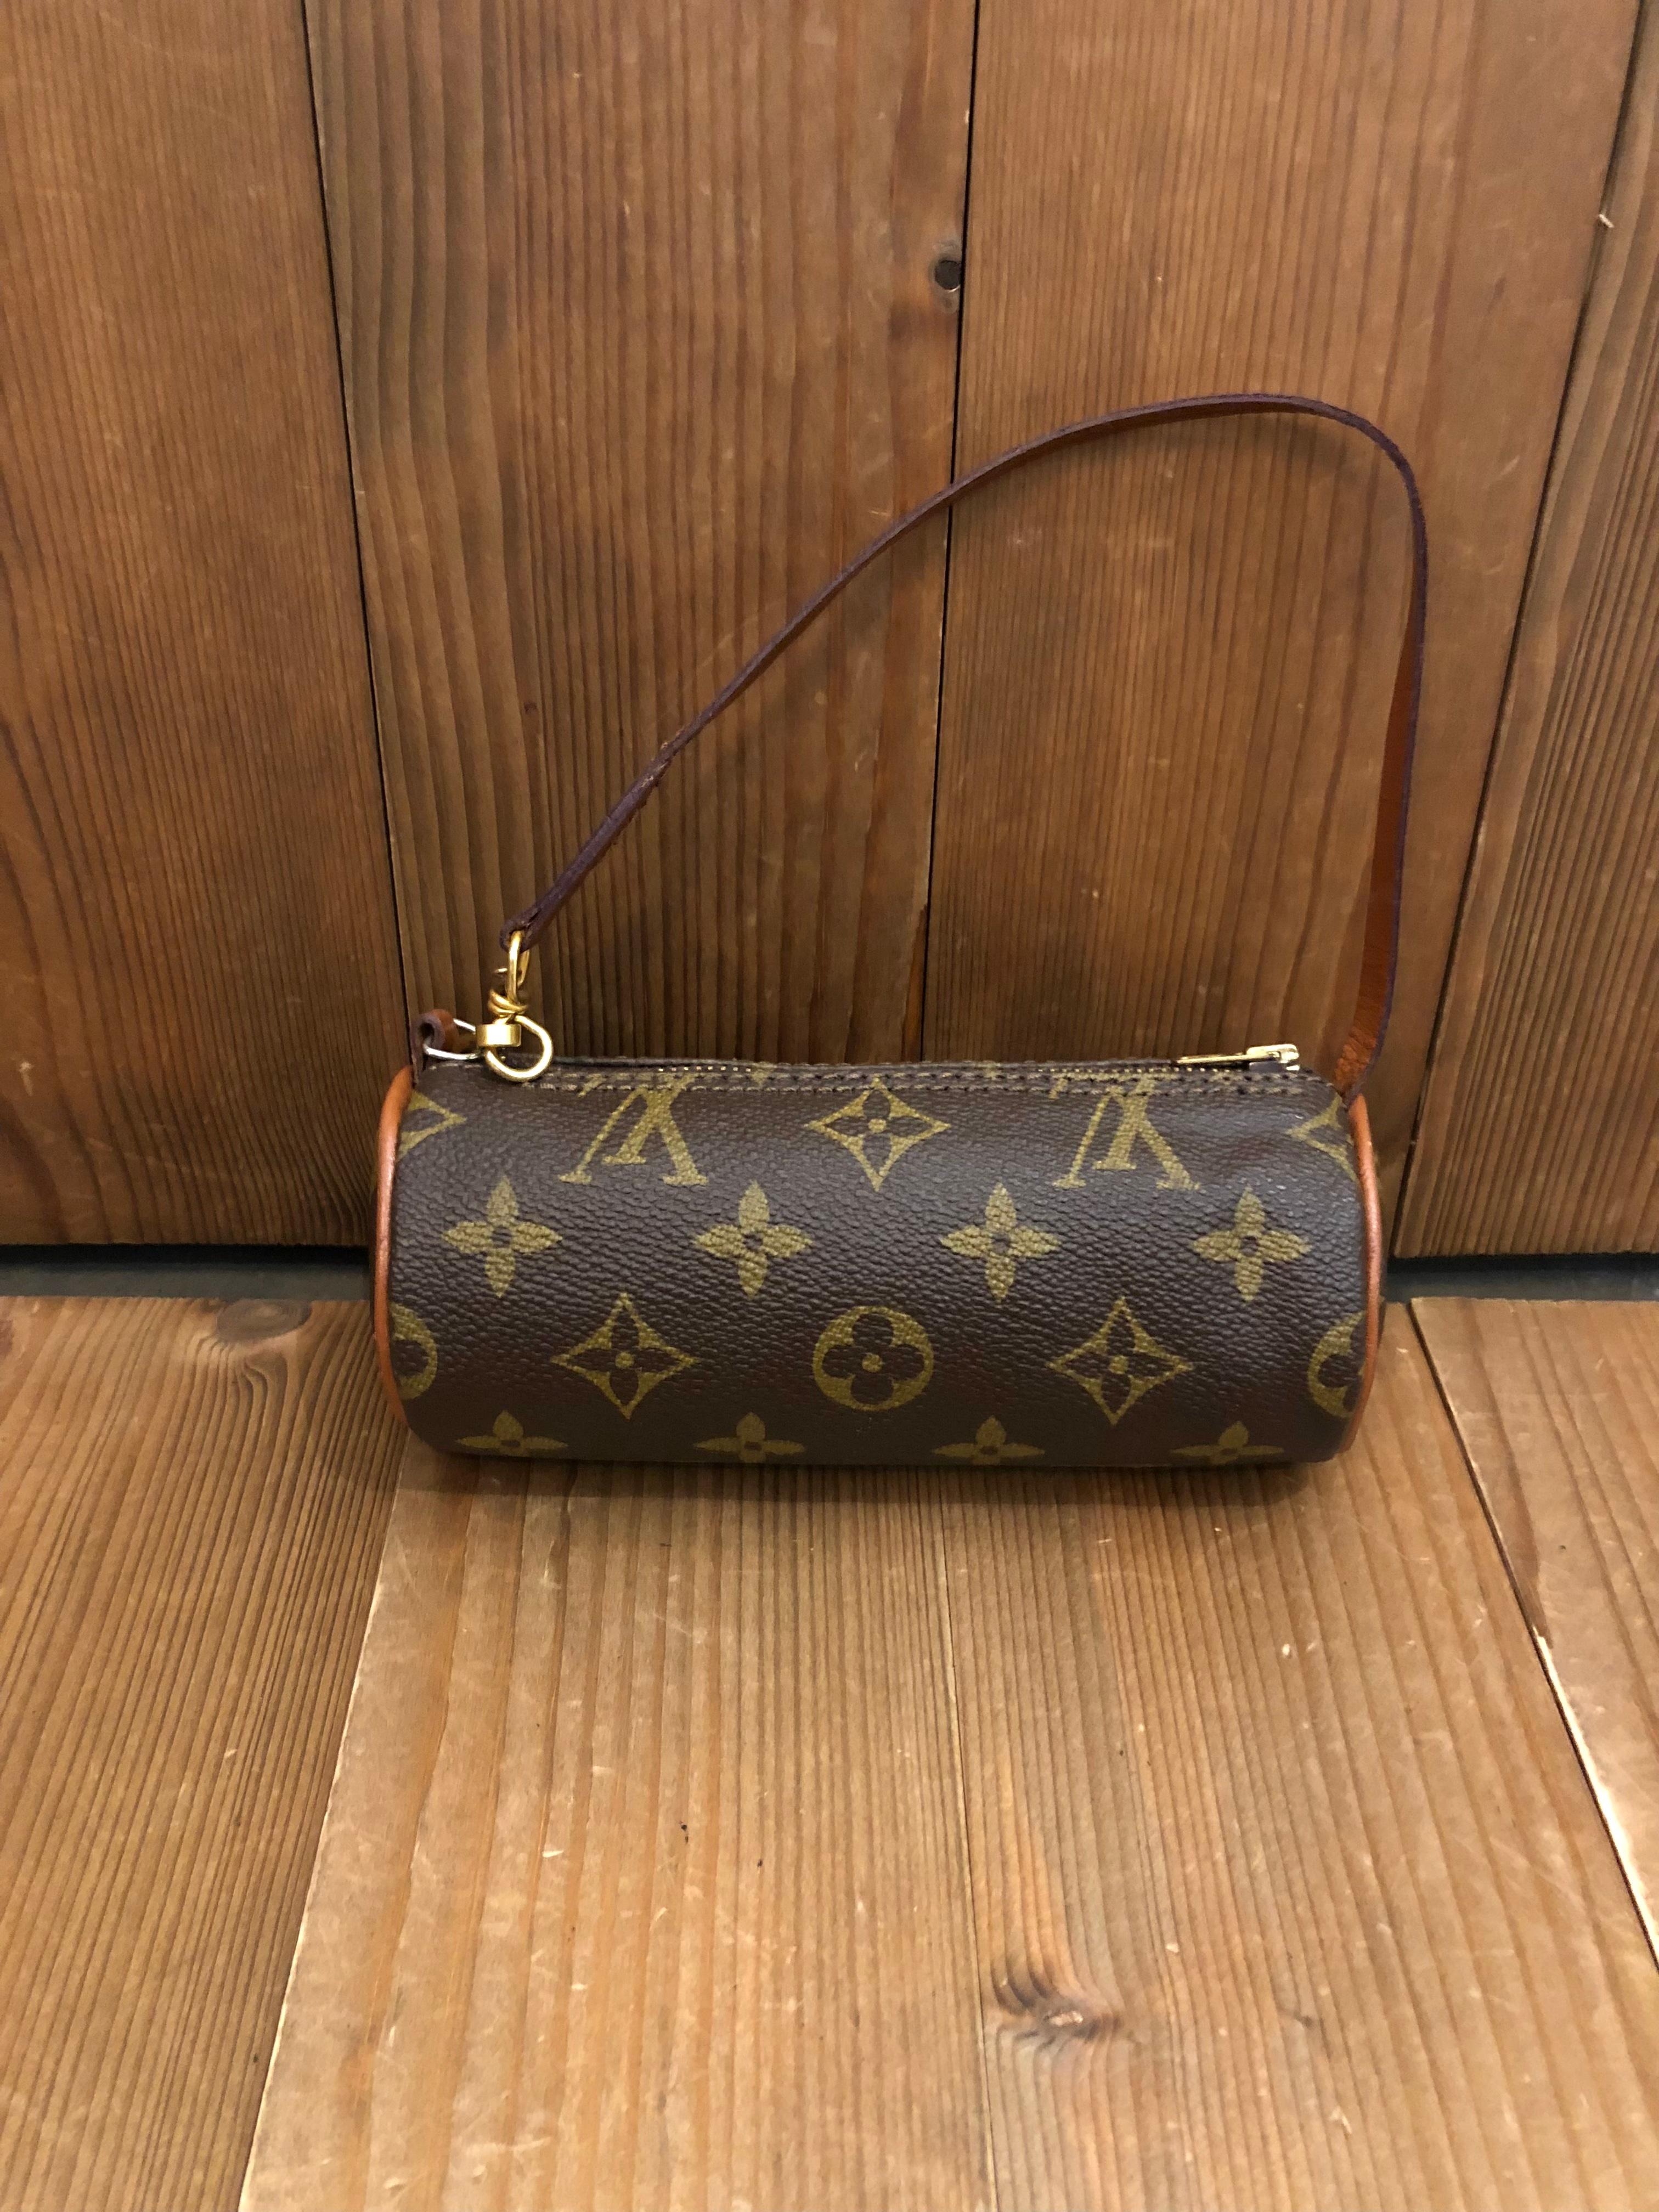 Vintage LOUIS VUITTON mini Papillon pouch in brown monogram canvas and leather. This mini papillon originally came with the mother papillon. Datecode stamped on the mother papillon and so this mini papillon pouch does not have a datecode. Vintage